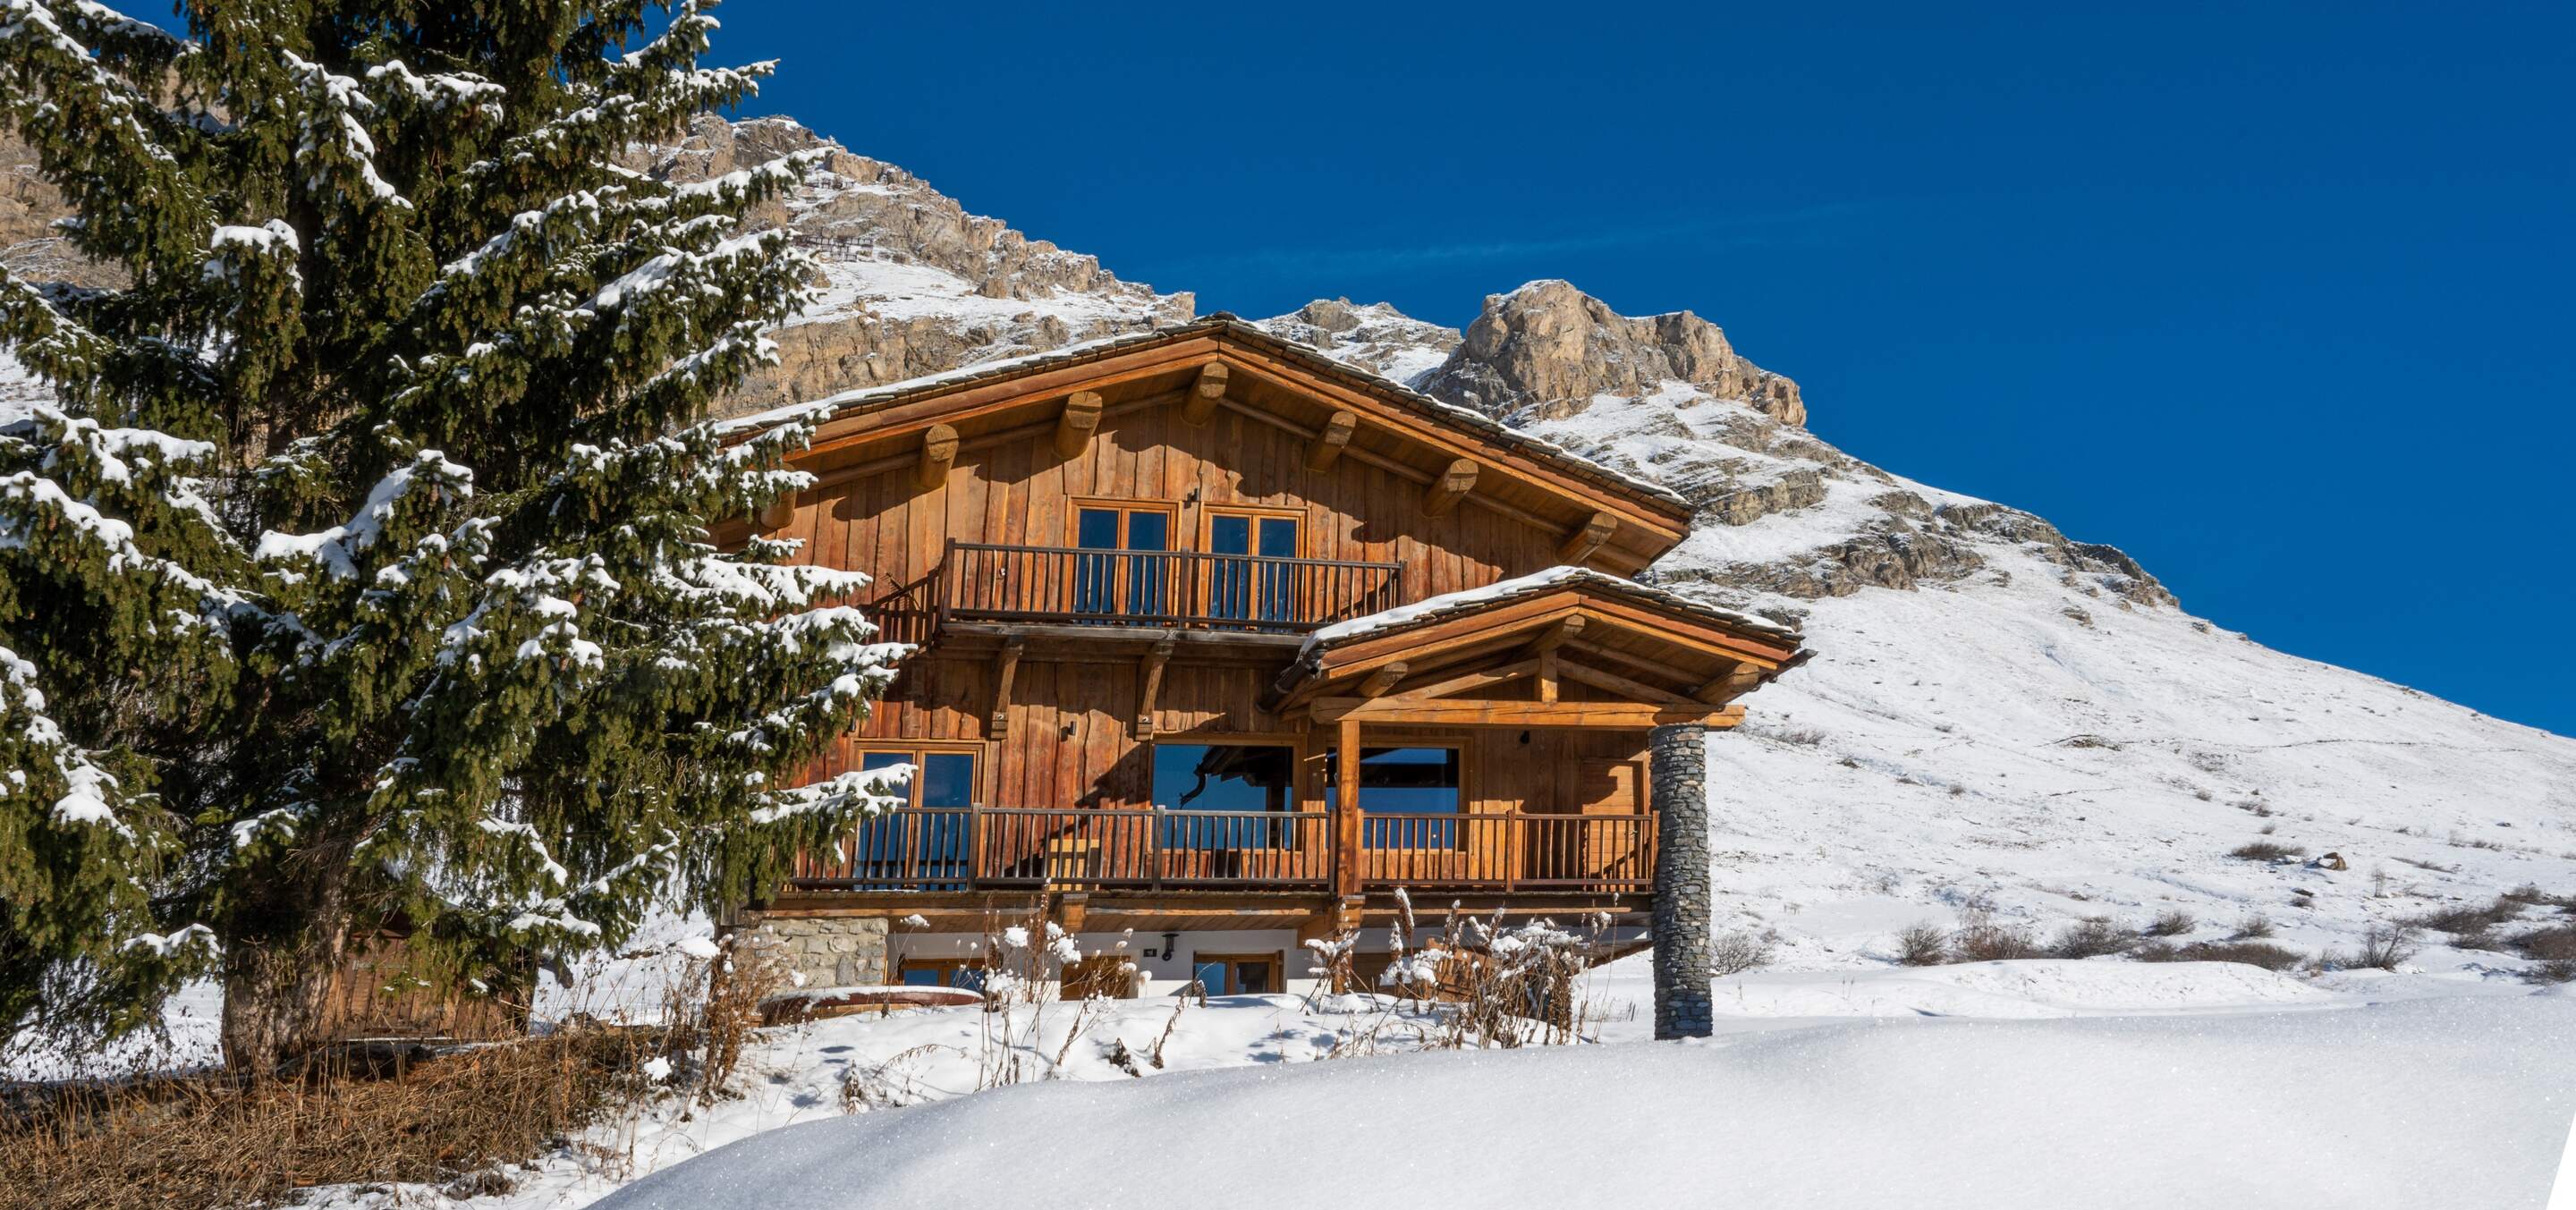 For Sale in the French Alps: Ski Chalet With a Backyard Mountain Range -  The New York Times